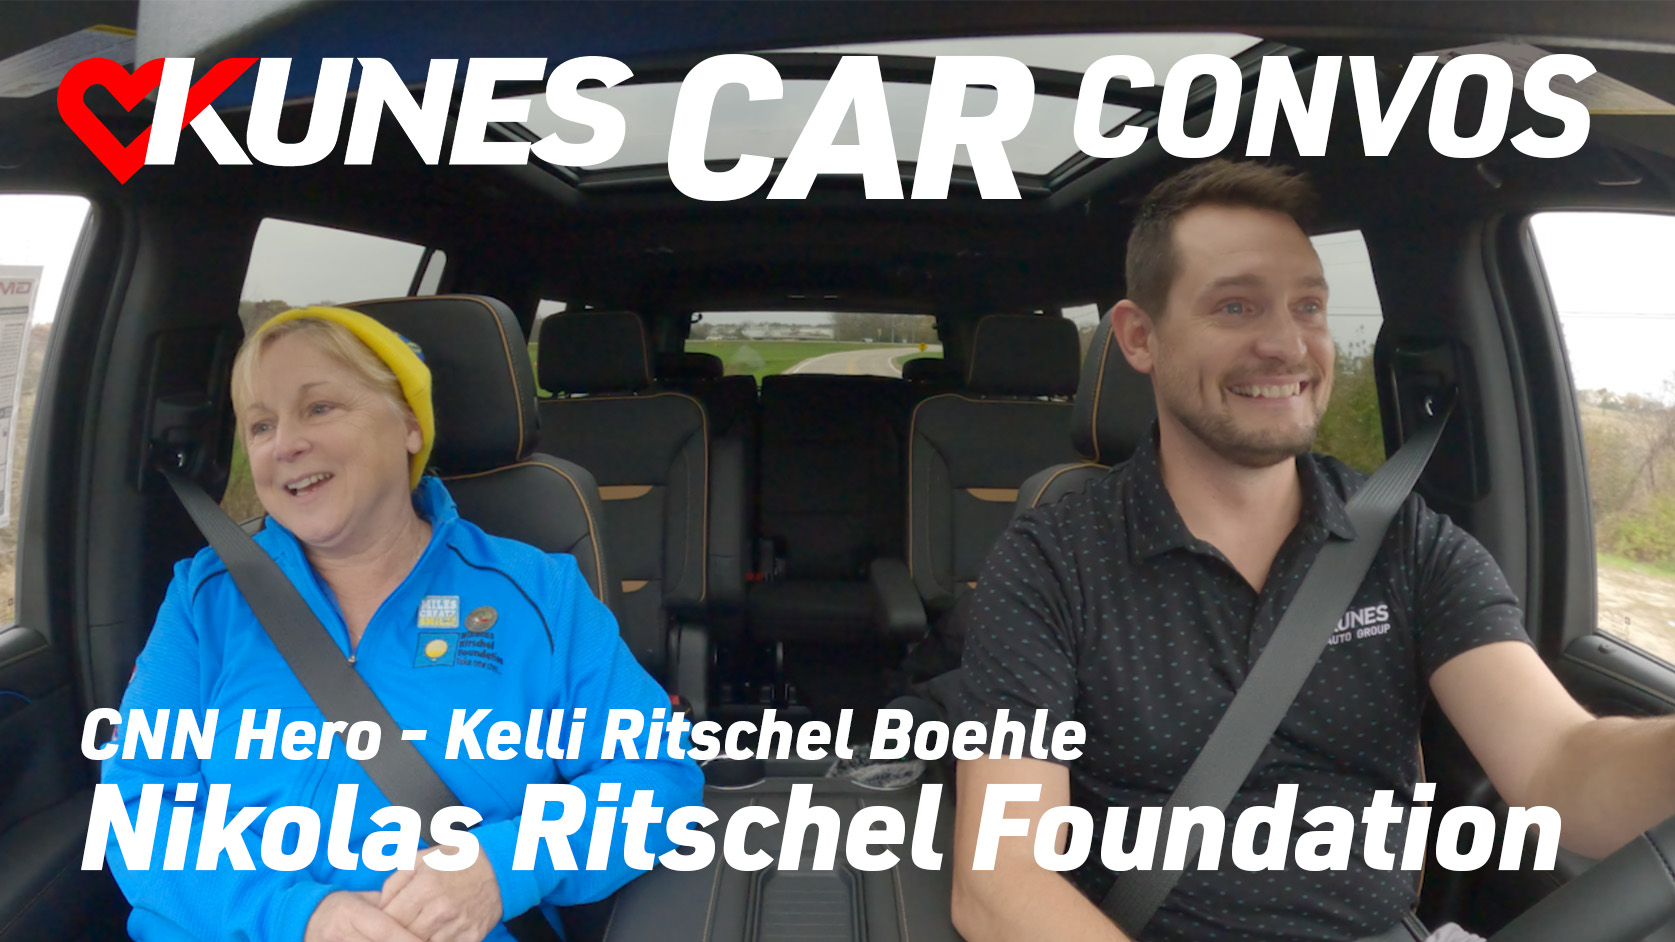 Pictured left to right: Kelli Ritschel Boehle, founder of Nik's Wish, with Scott Wolf, General Manager of Kunes GMC of Belivdere, IL, inside of a 2024 GMC Yukon XL AT4; Text reads: Kunes Car Convos; CNN Hero - Kelli Ritschel Boehle; Nikolas Ritschel Foundation